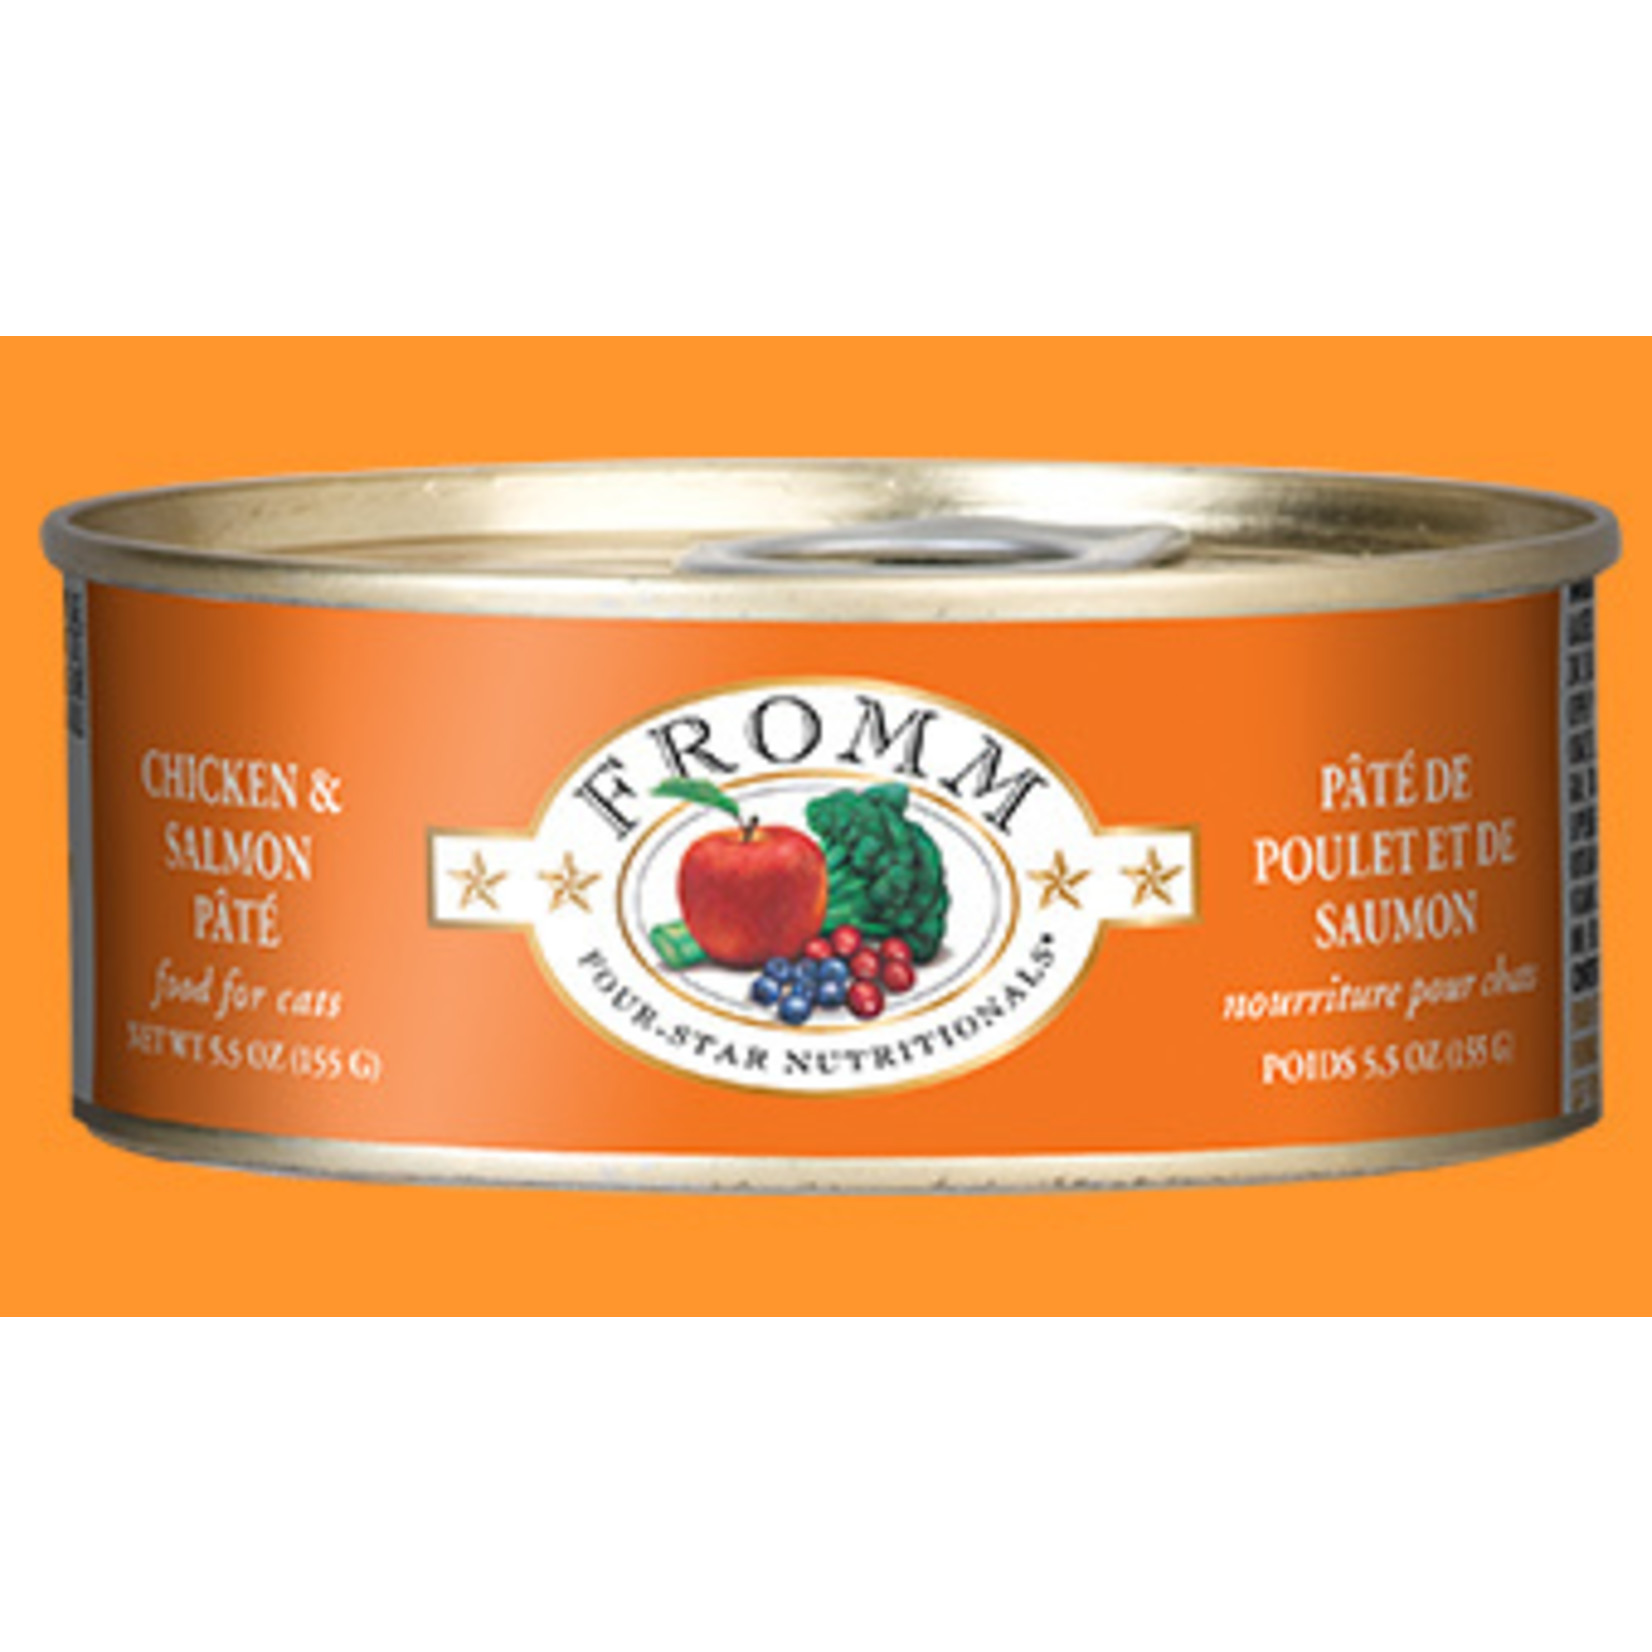 Fromm Fromm Wet Cat Food Four Star Nutritionals Chicken & Salmon Pate 5.5oz Can Grain Free